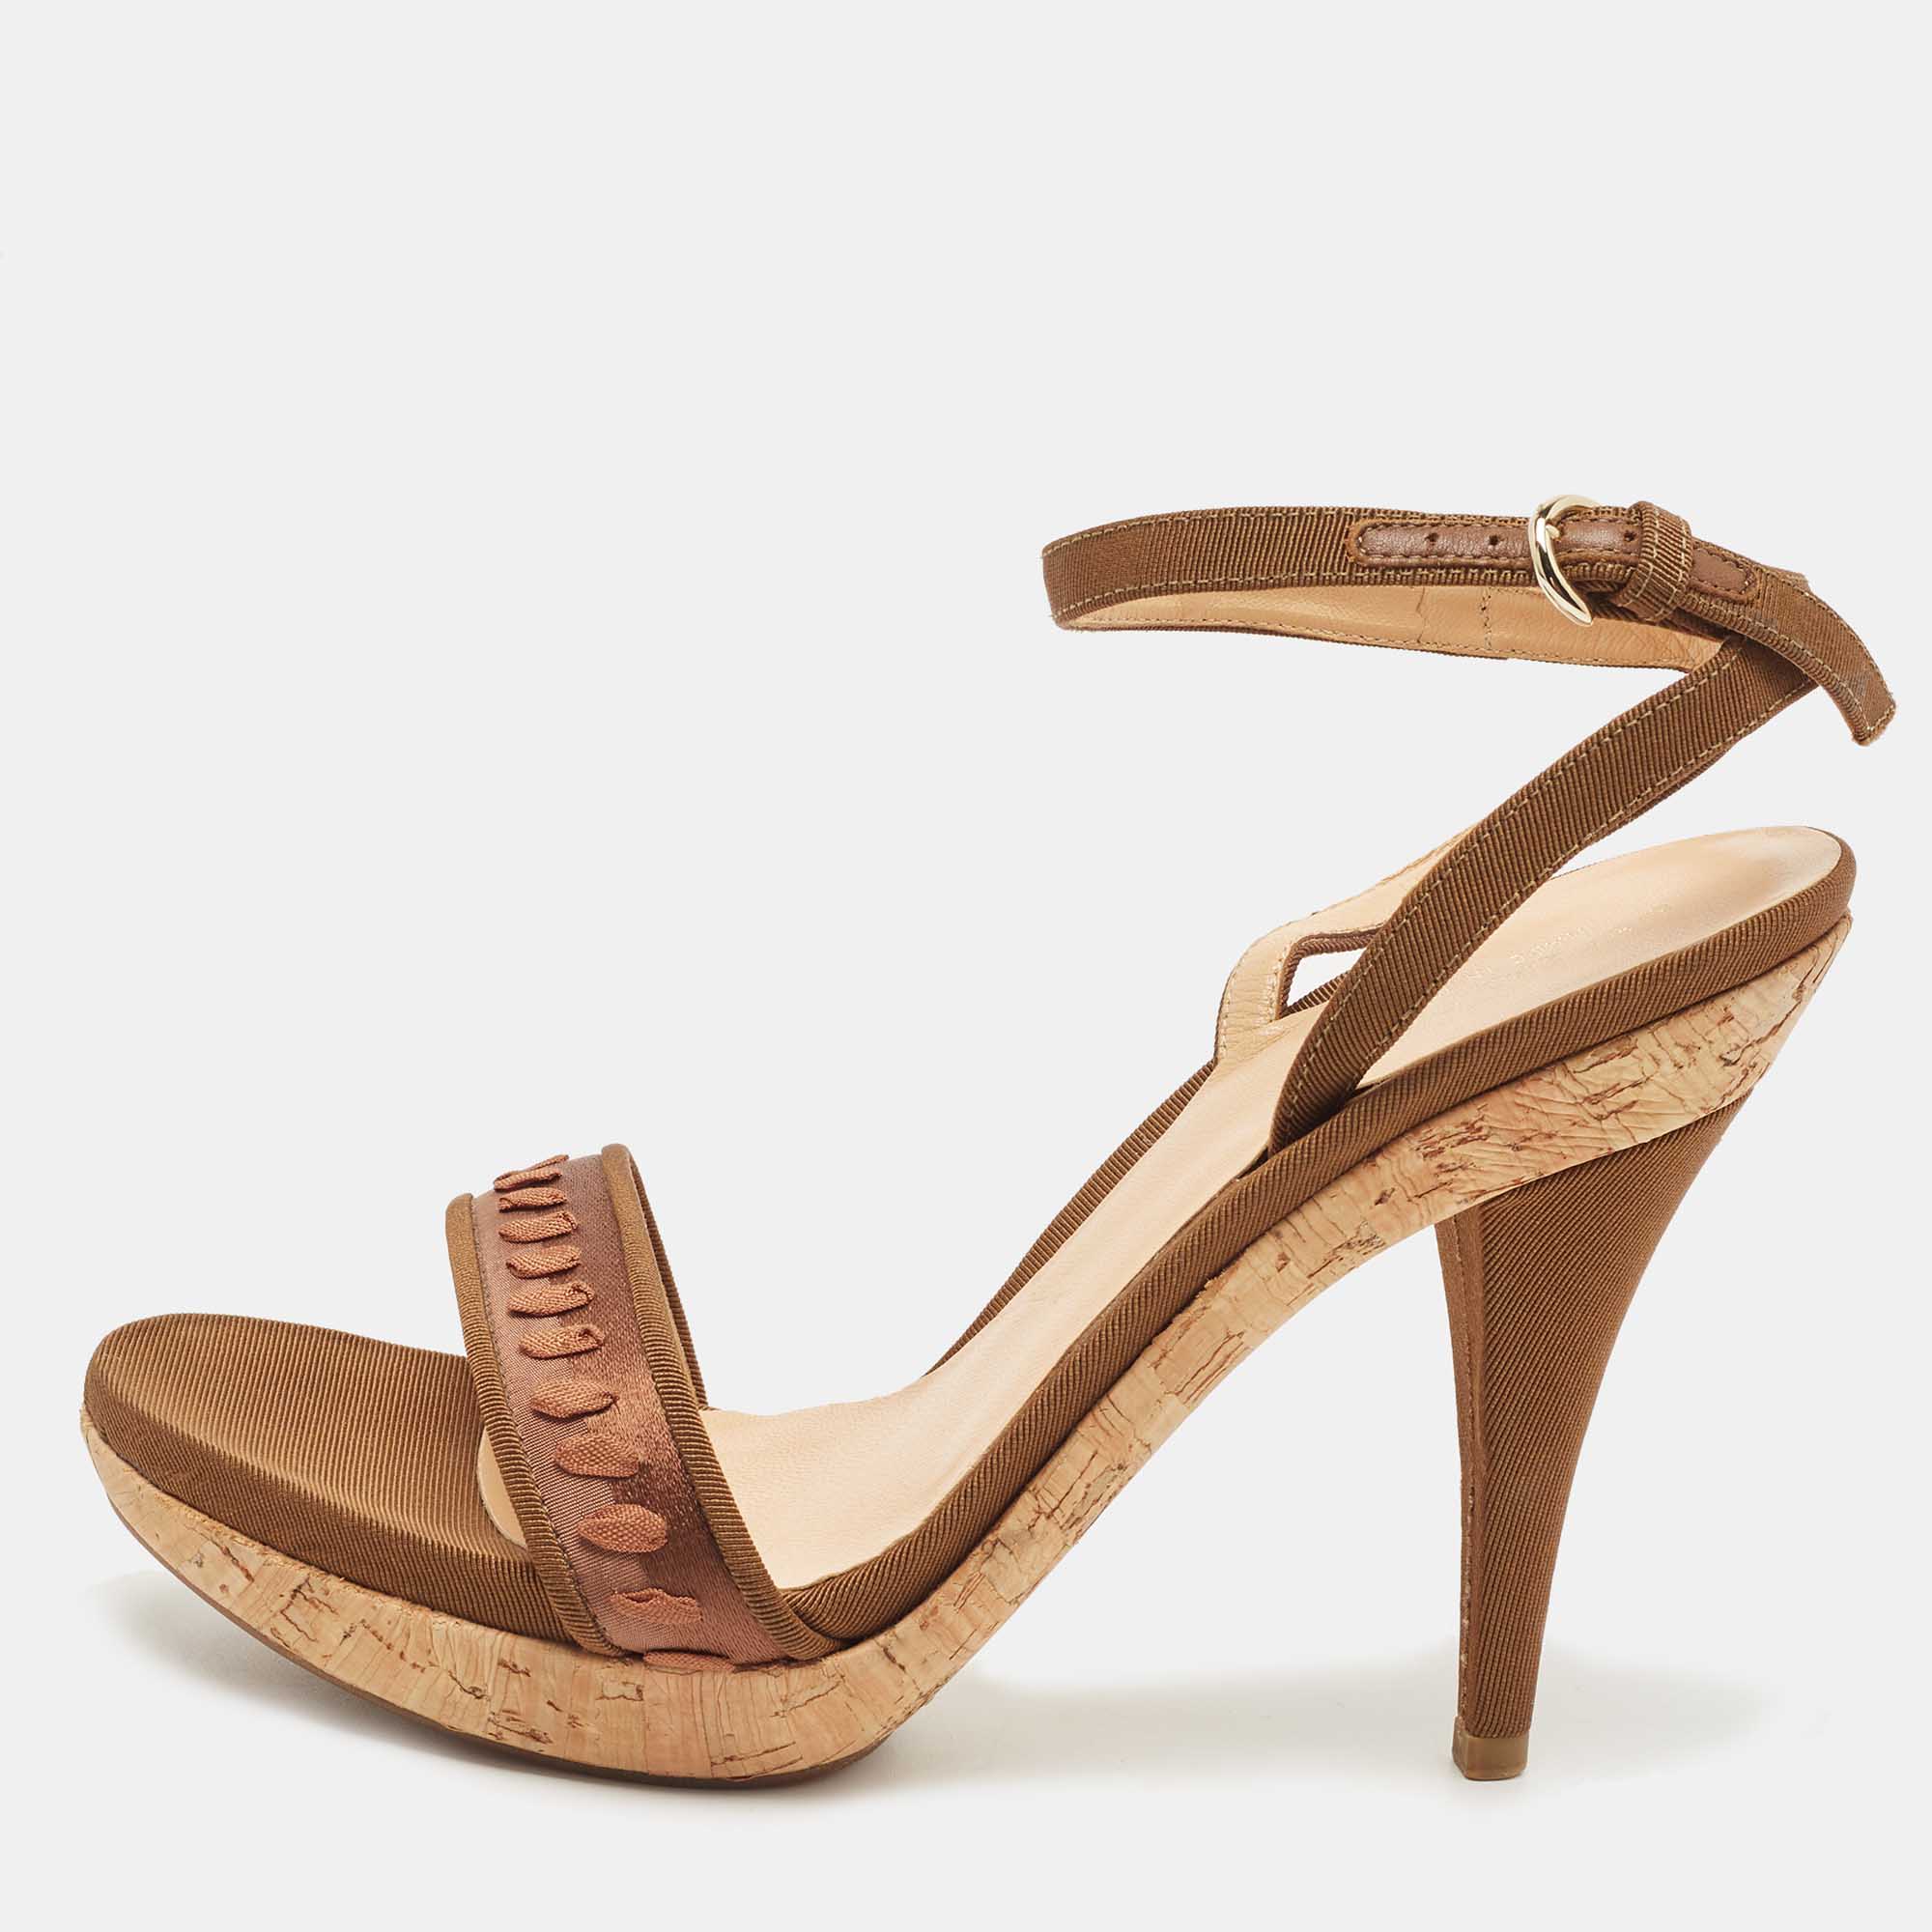 Sergio rossi brown canvas ankle strap sandals size 37.5